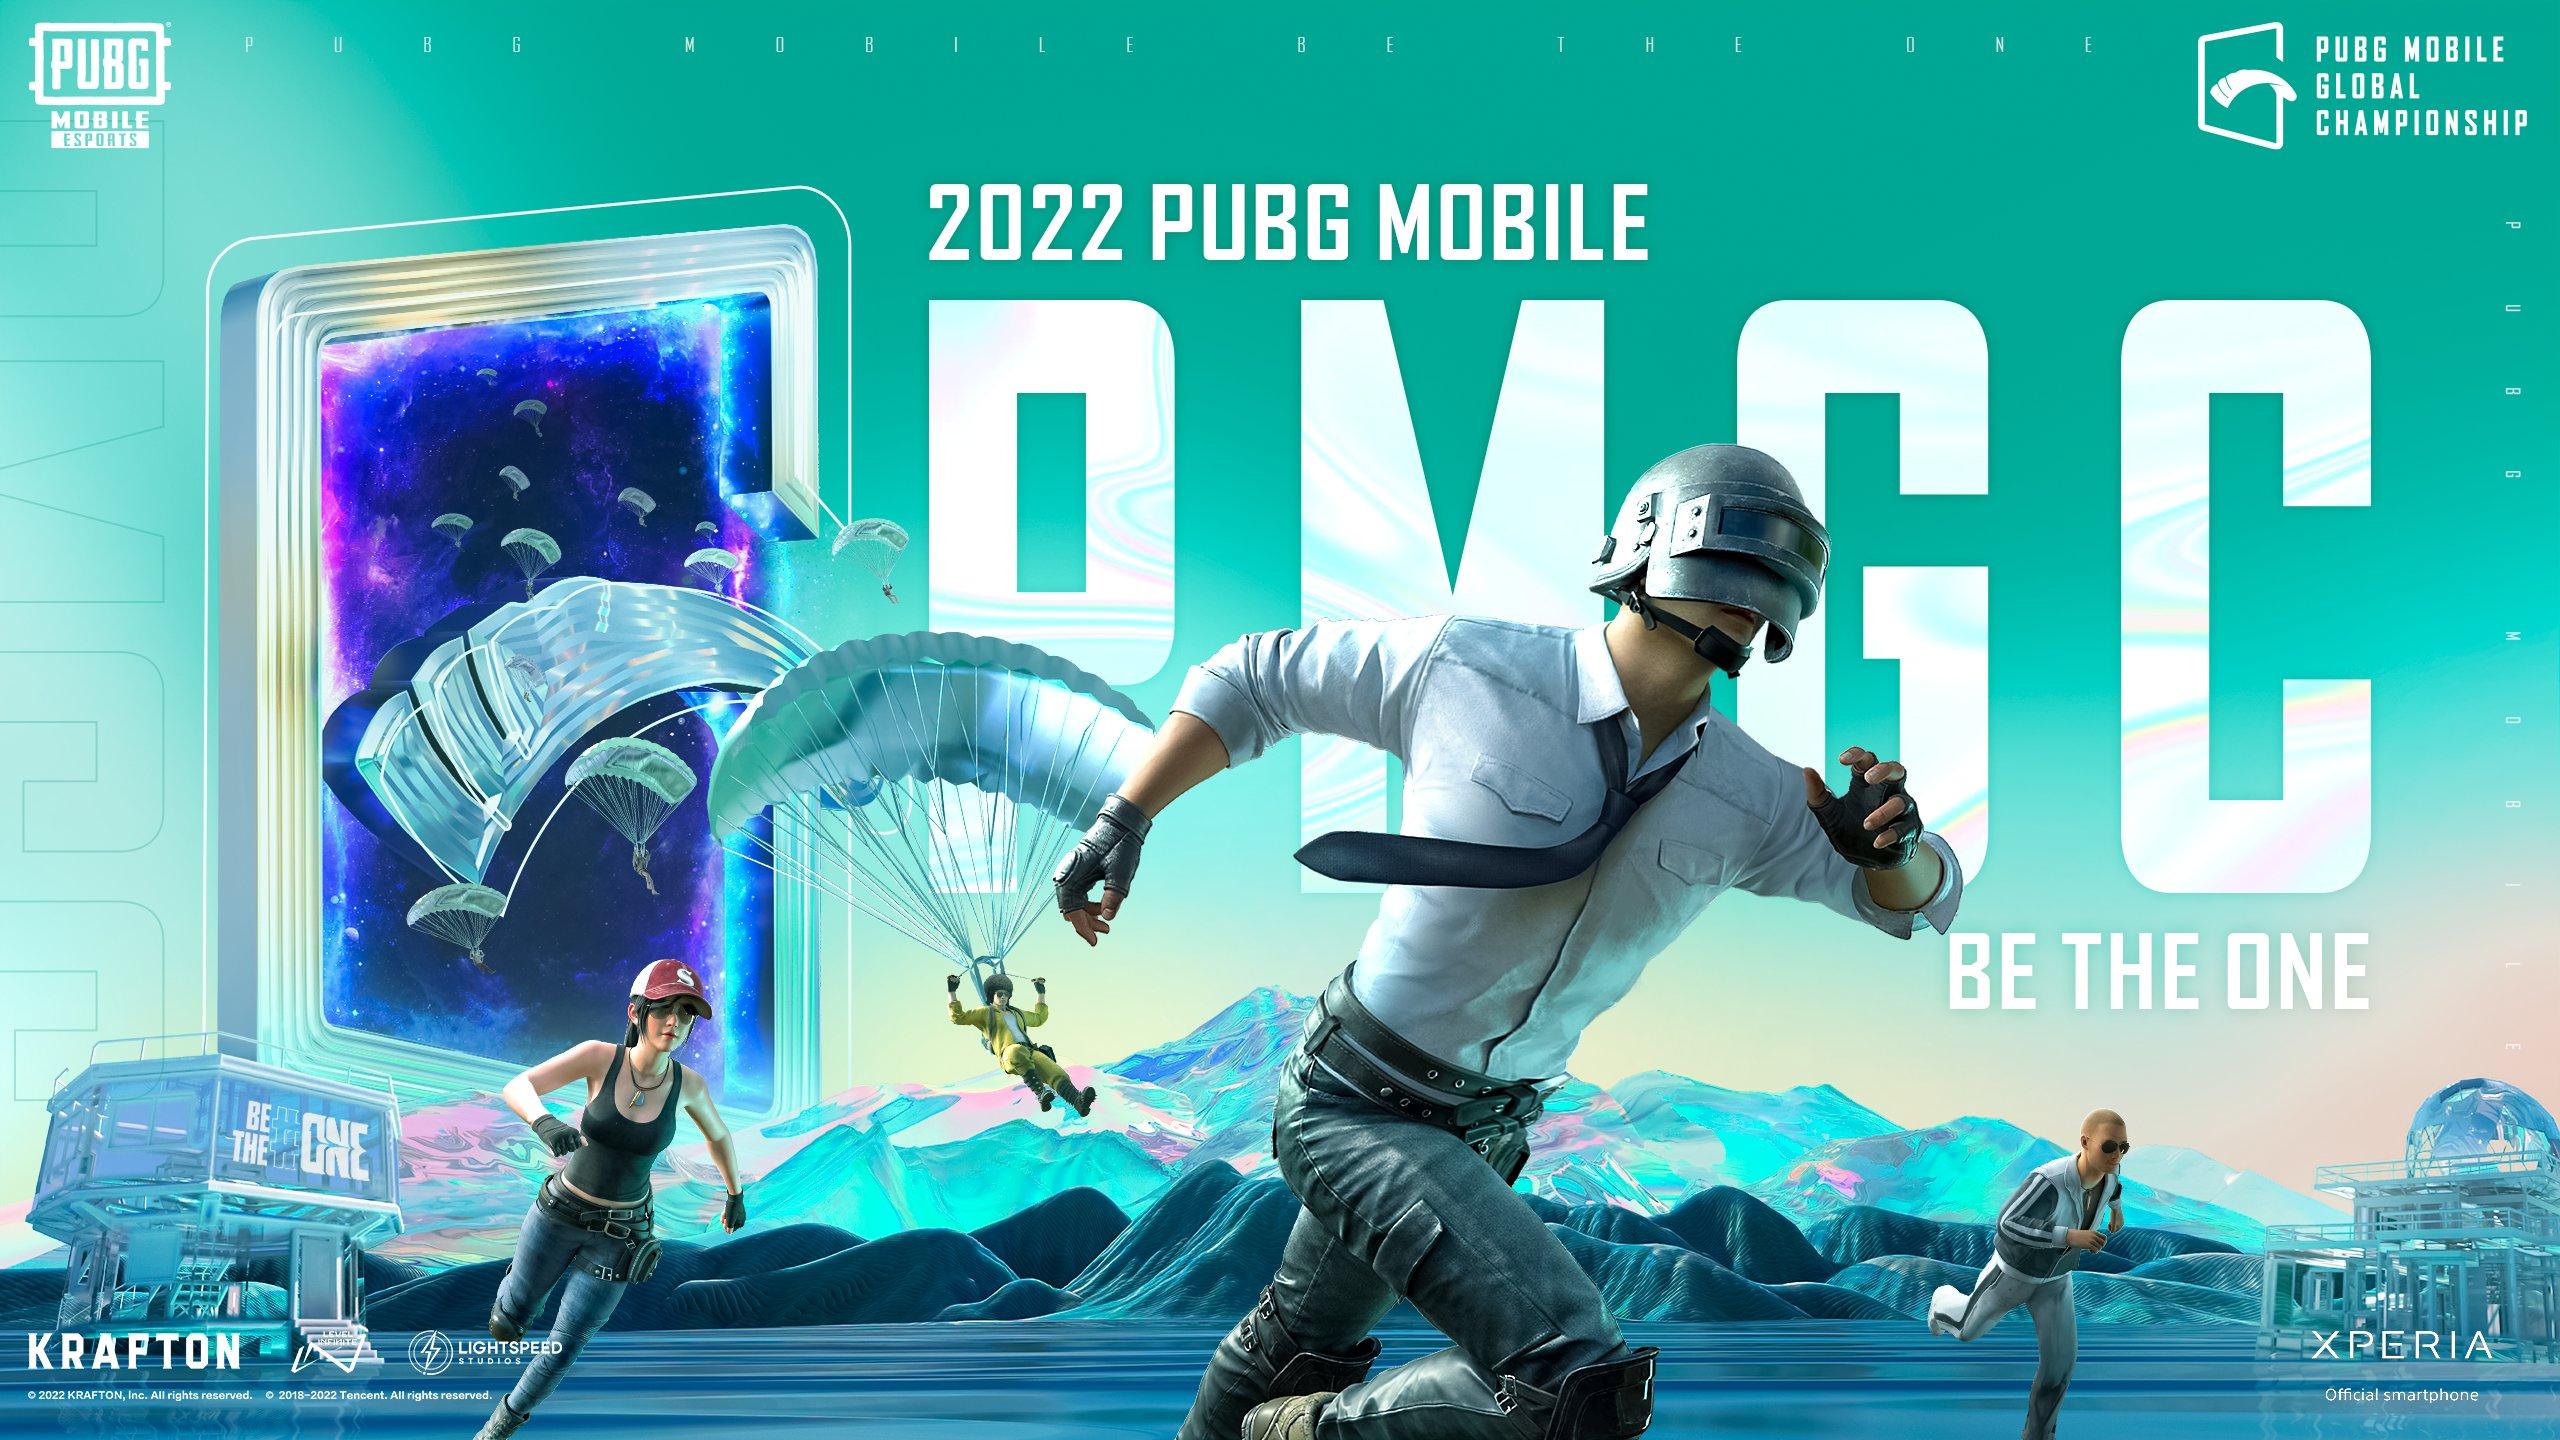 2022 PUBG MOBILE GLOBAL CHAMPIONSHIP feature image